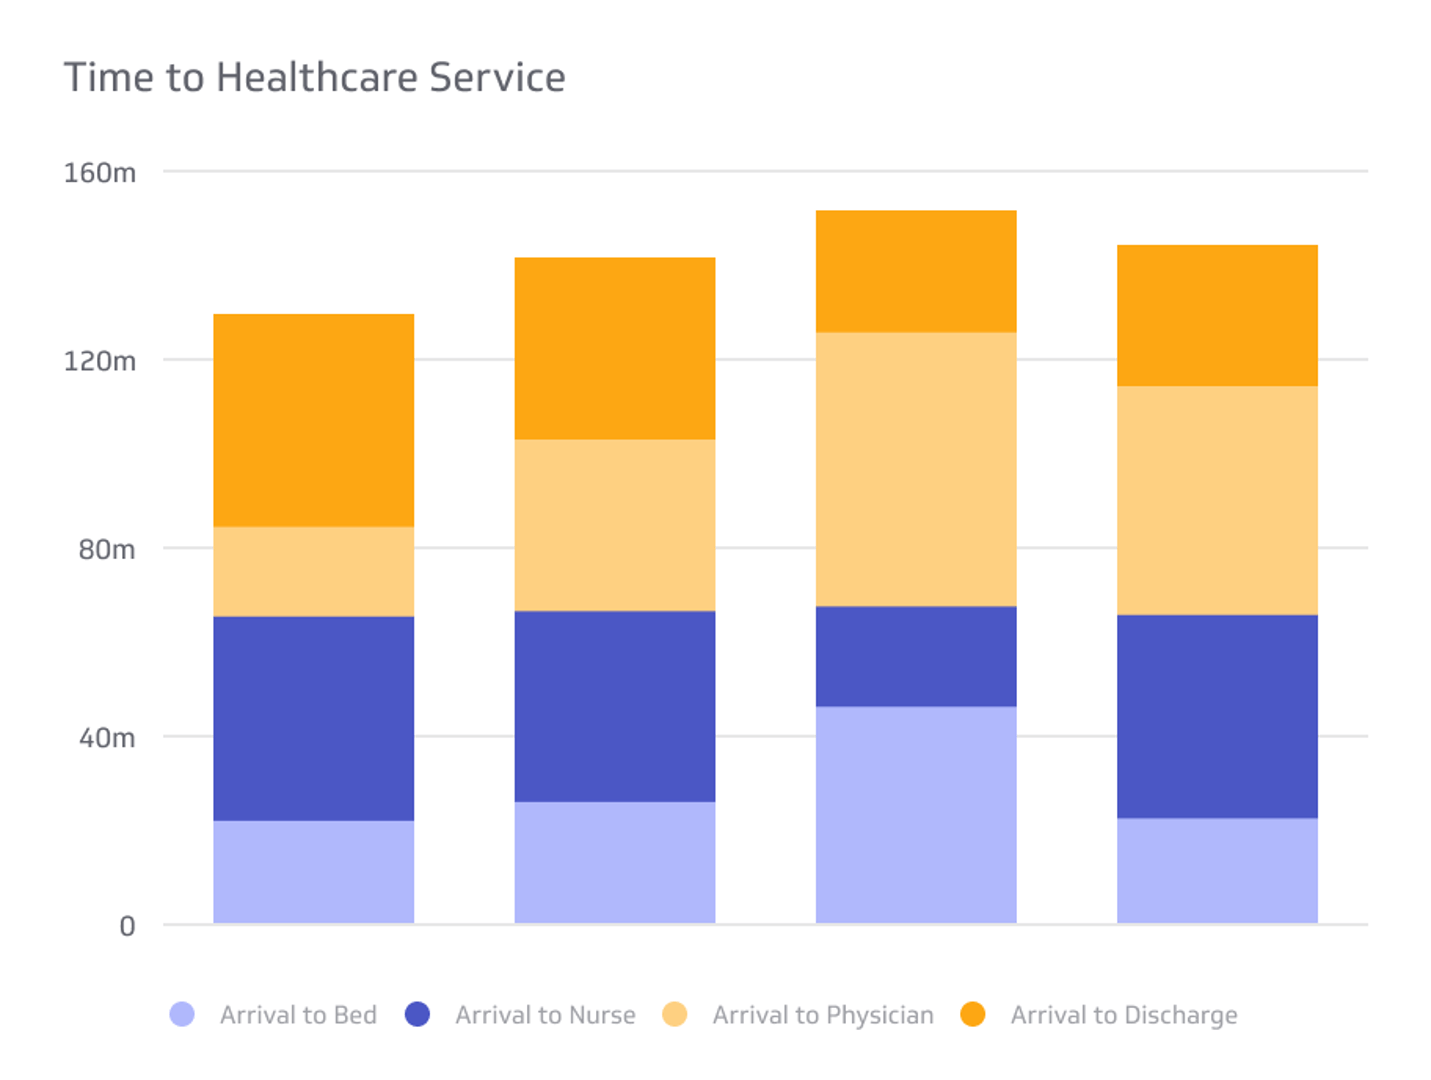 Related KPI Examples - Time to Healthcare Service Metric